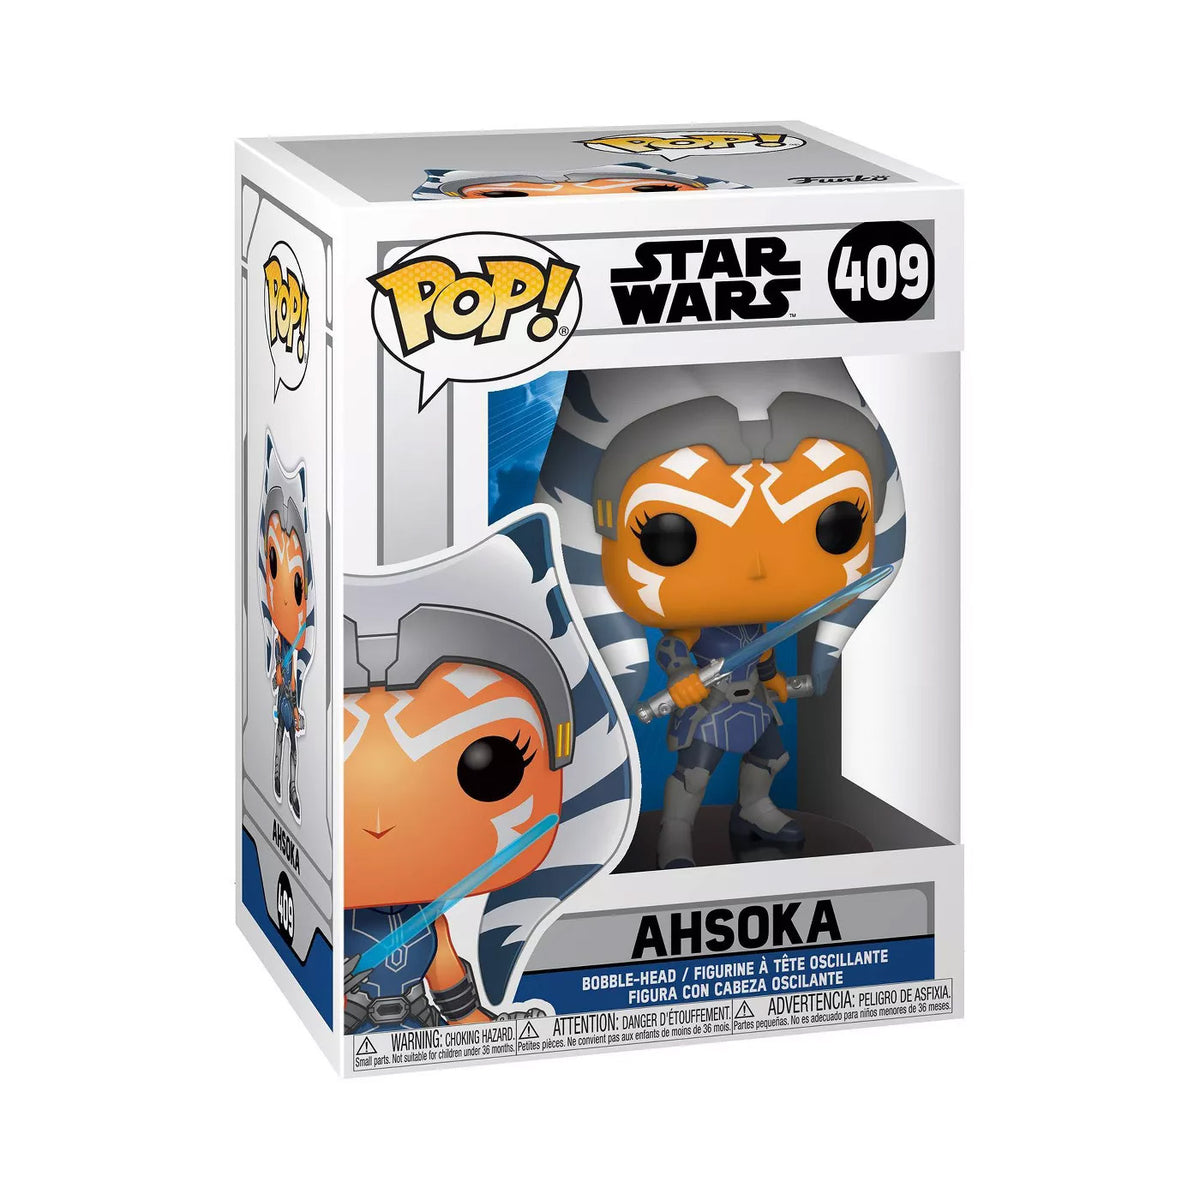 Image of Funko POP!: Star Wars - Ahsoka (409) 3.75 Inch Funko POP! sold by Stronghold Collectibles